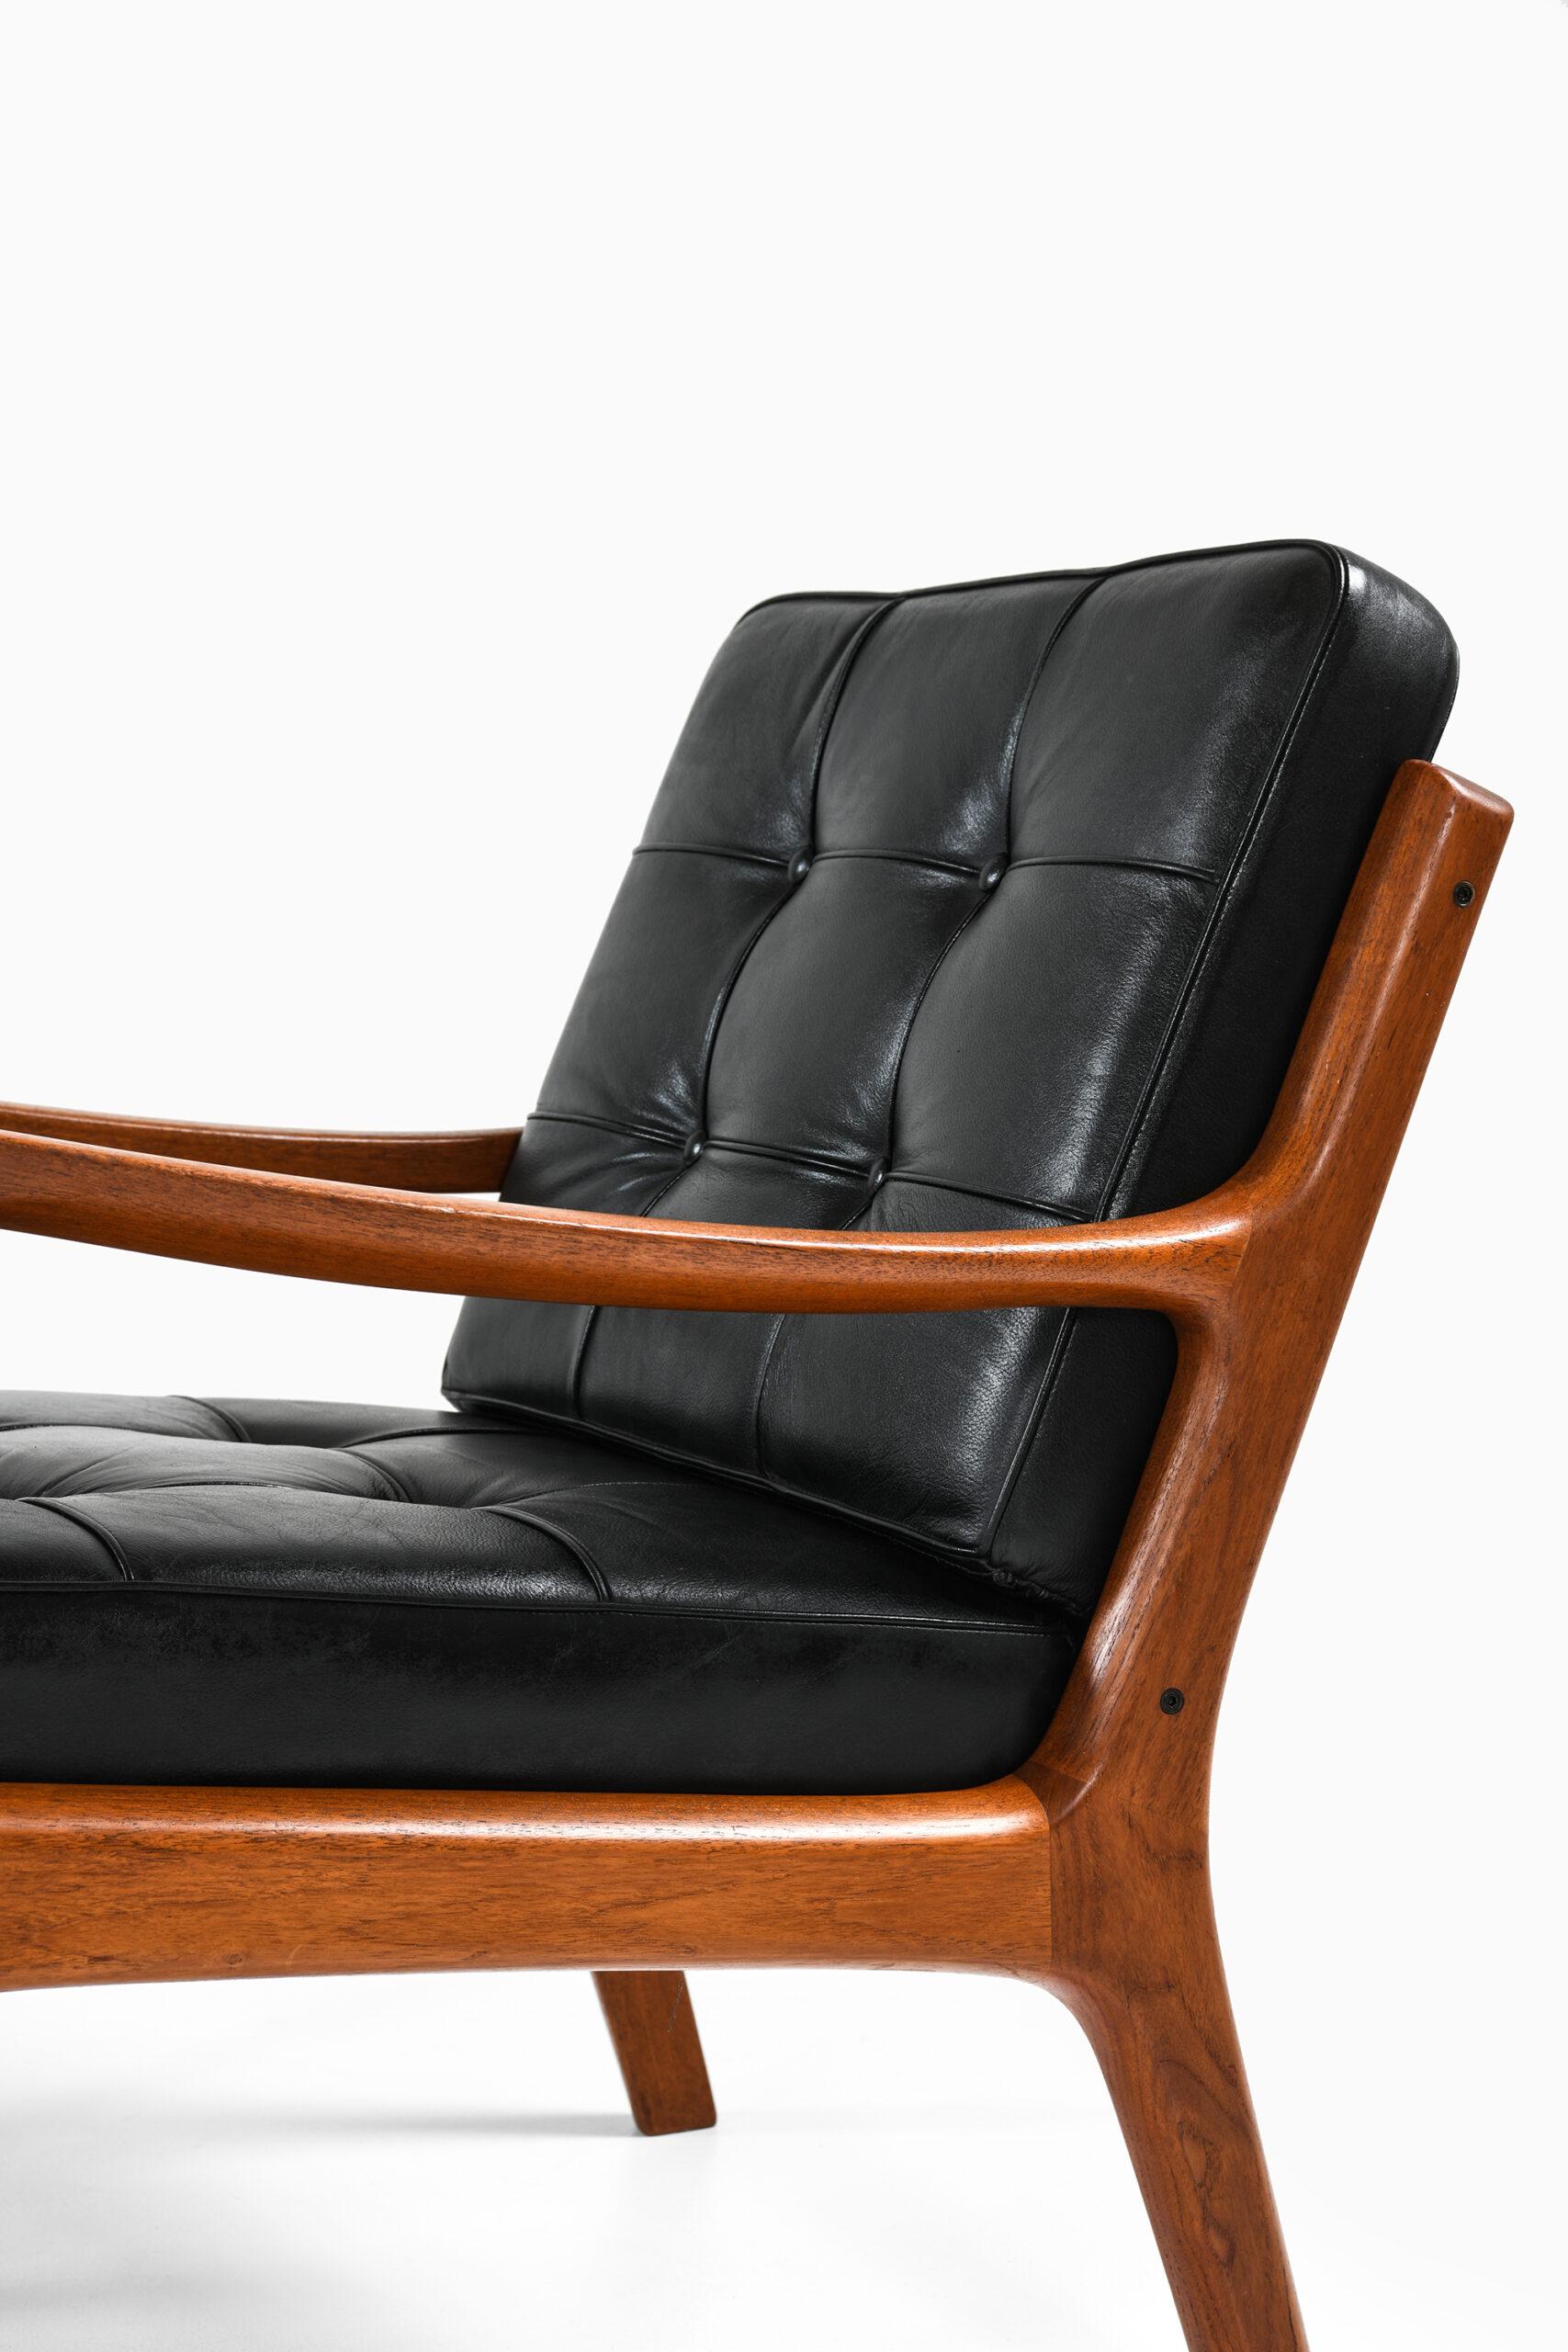 Easy chair model 116 / Senator designed by Ole Wanscher. Produced by France & Son in Denmark.